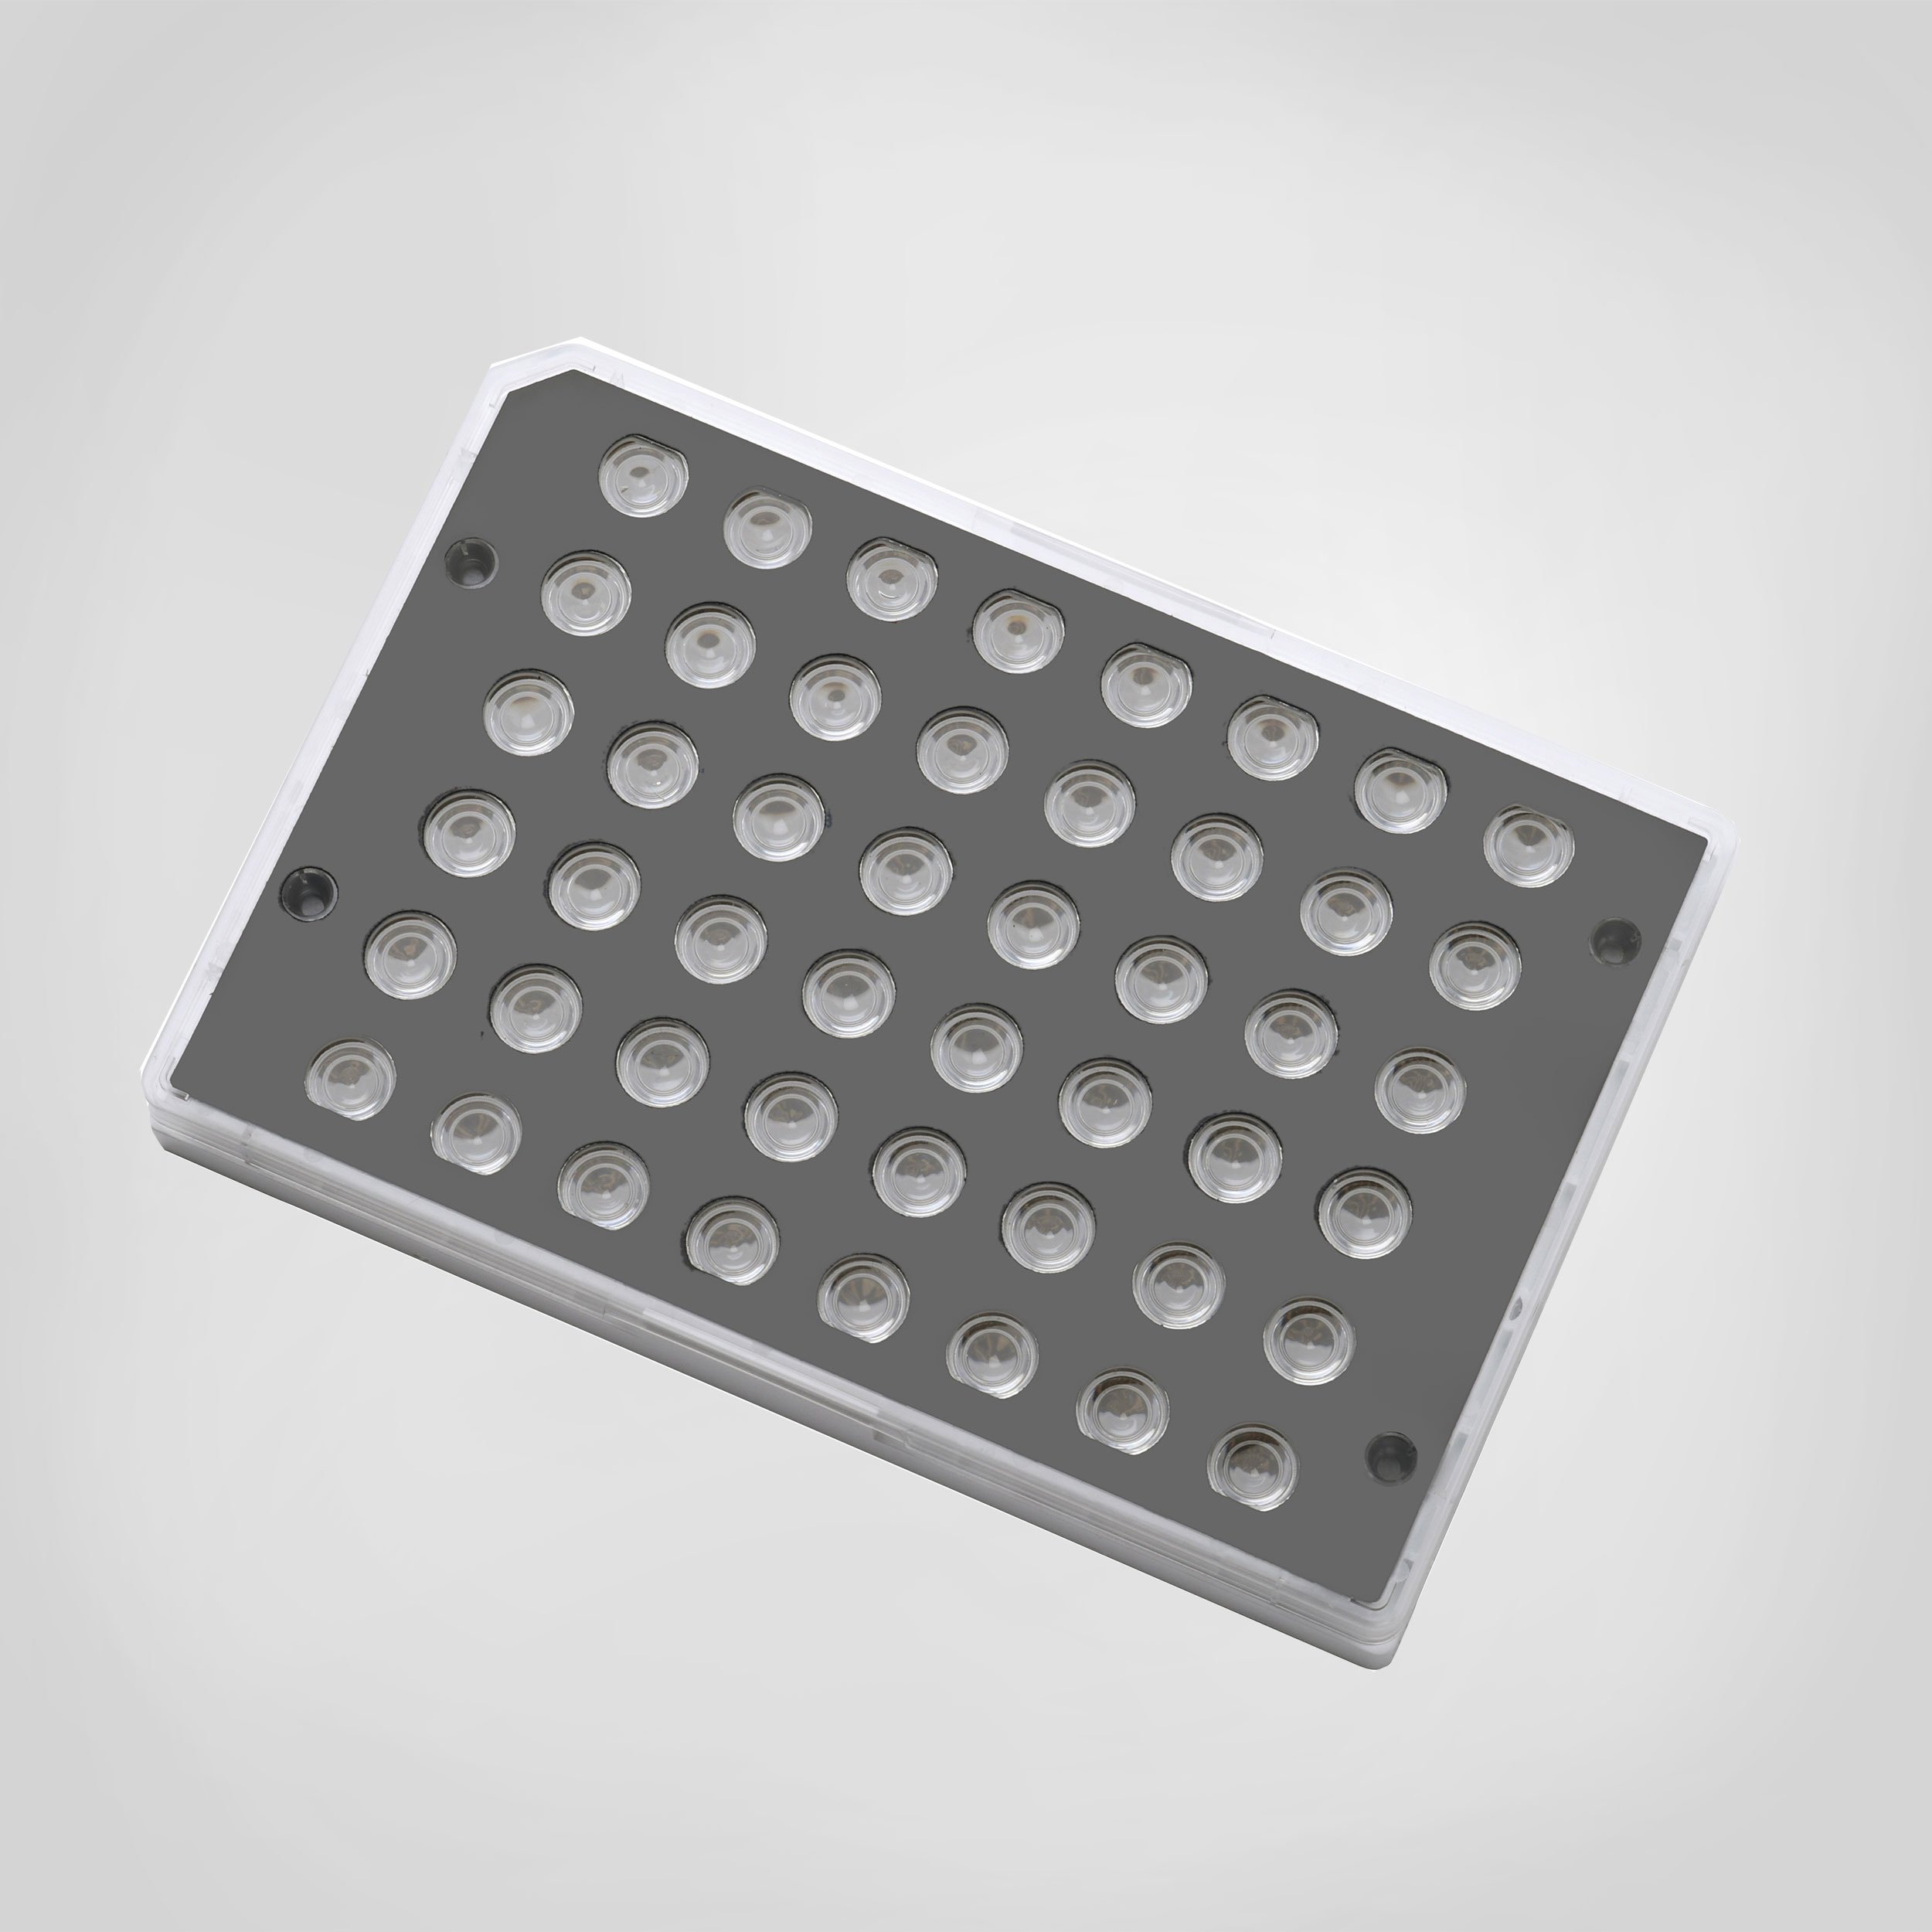 Lumos multiwell microelectrode array MEA plate